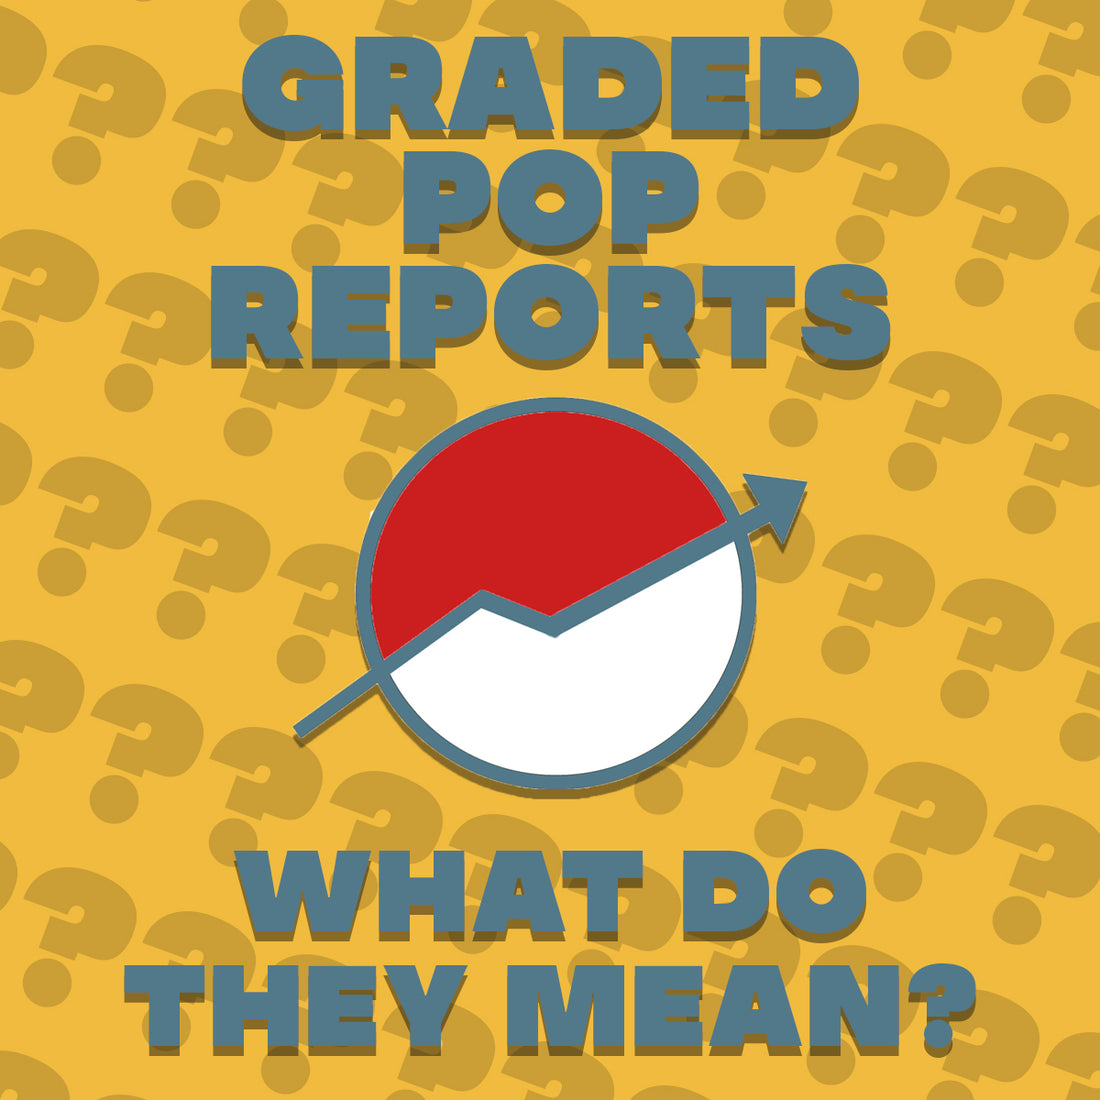 Graded Pop Reports - What do they mean?